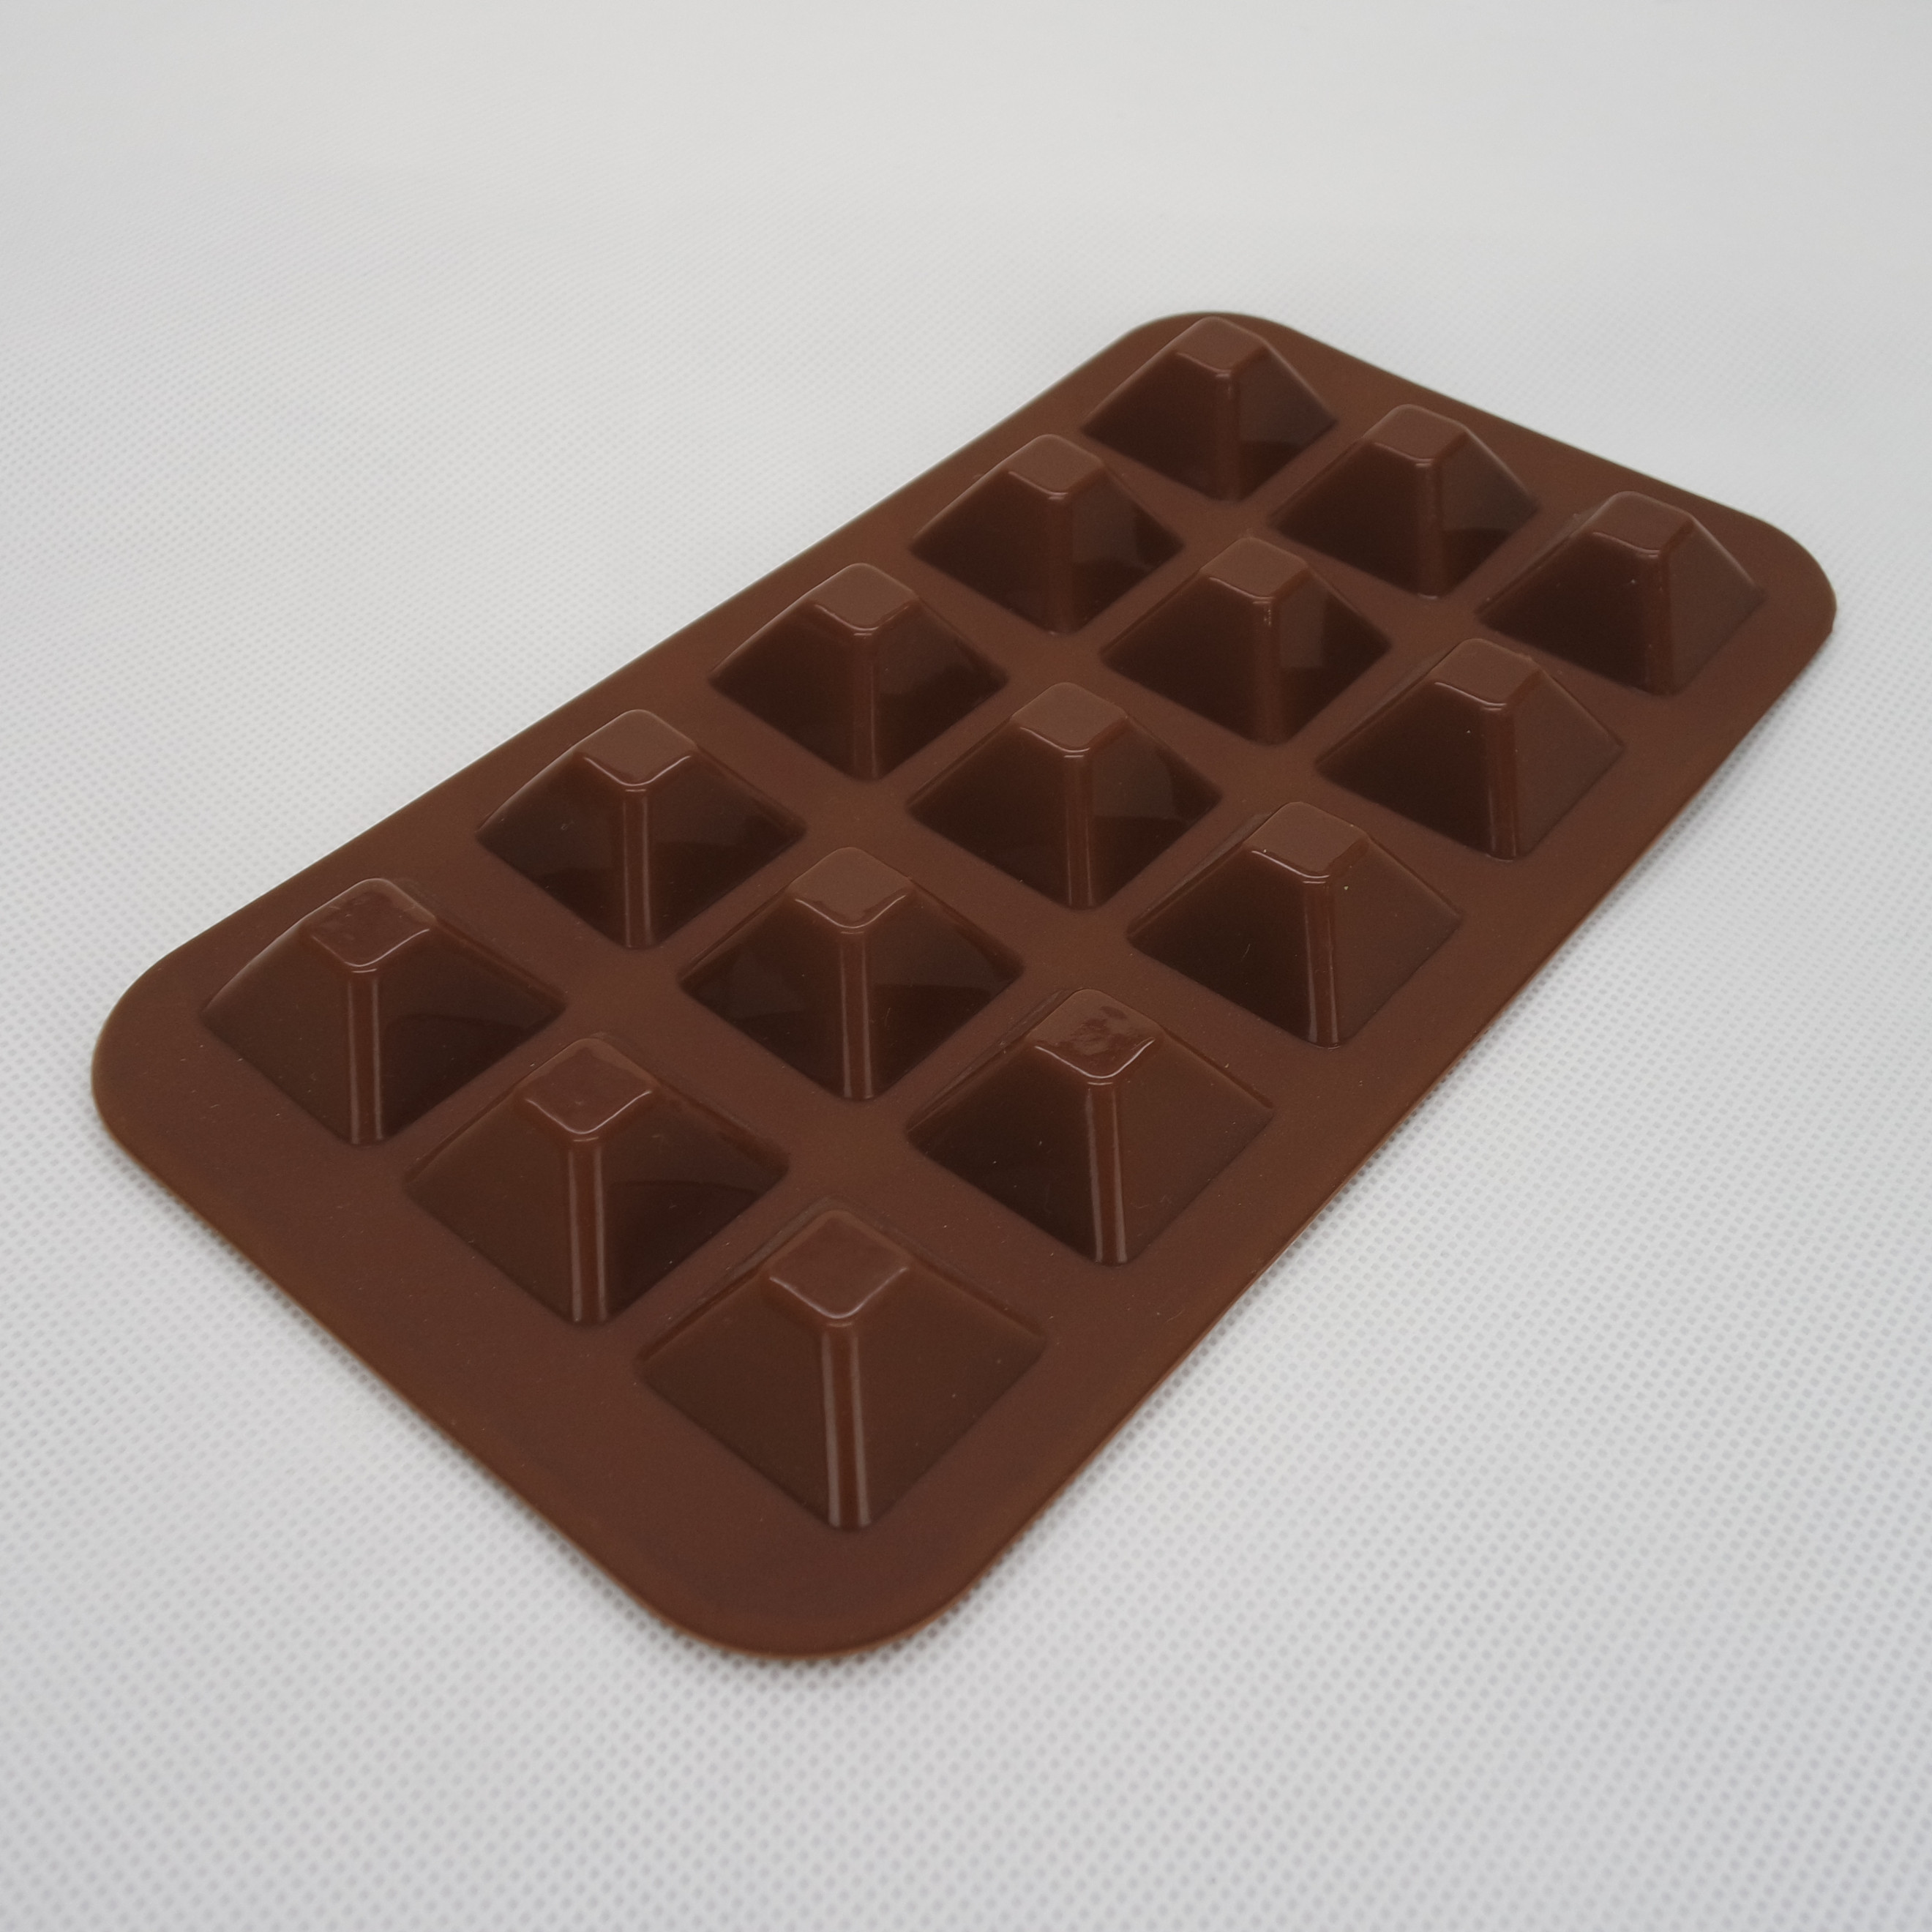 CXCH-022	Silicone chocolate mould